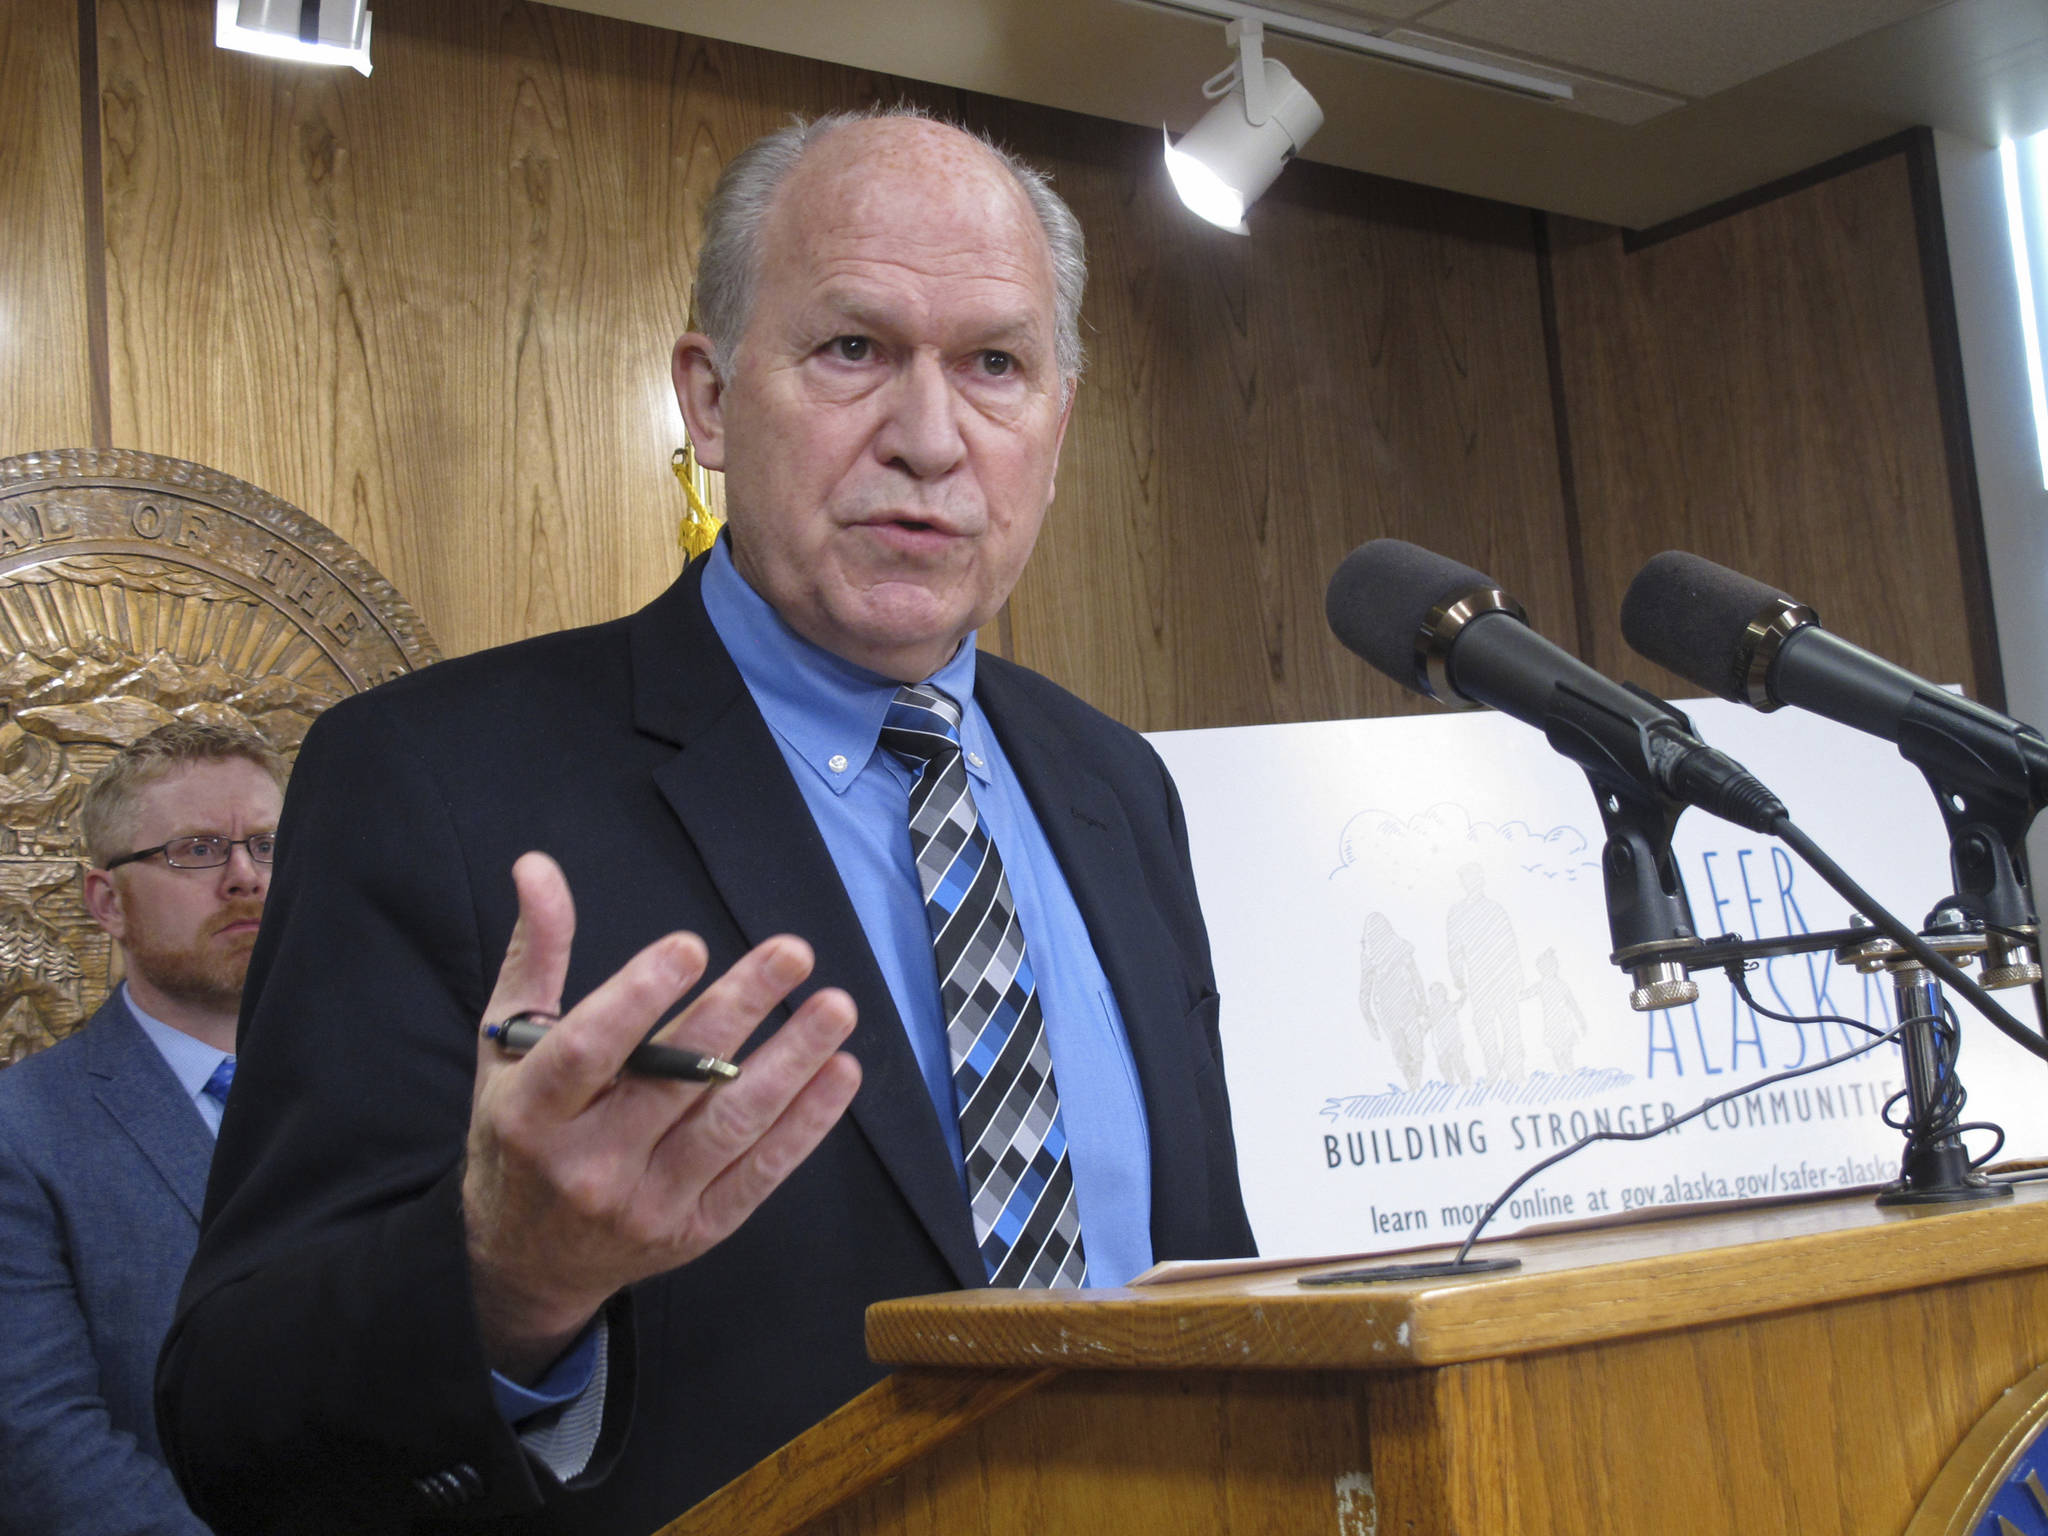 Alaska Gov. Bill Walker speaks during a news conference in which he outlined legislation aimed at further addressing opioid abuse in the state on Monday, March 6, 2017, in Juneau, Alaska. (AP Photo/Becky Bohrer)